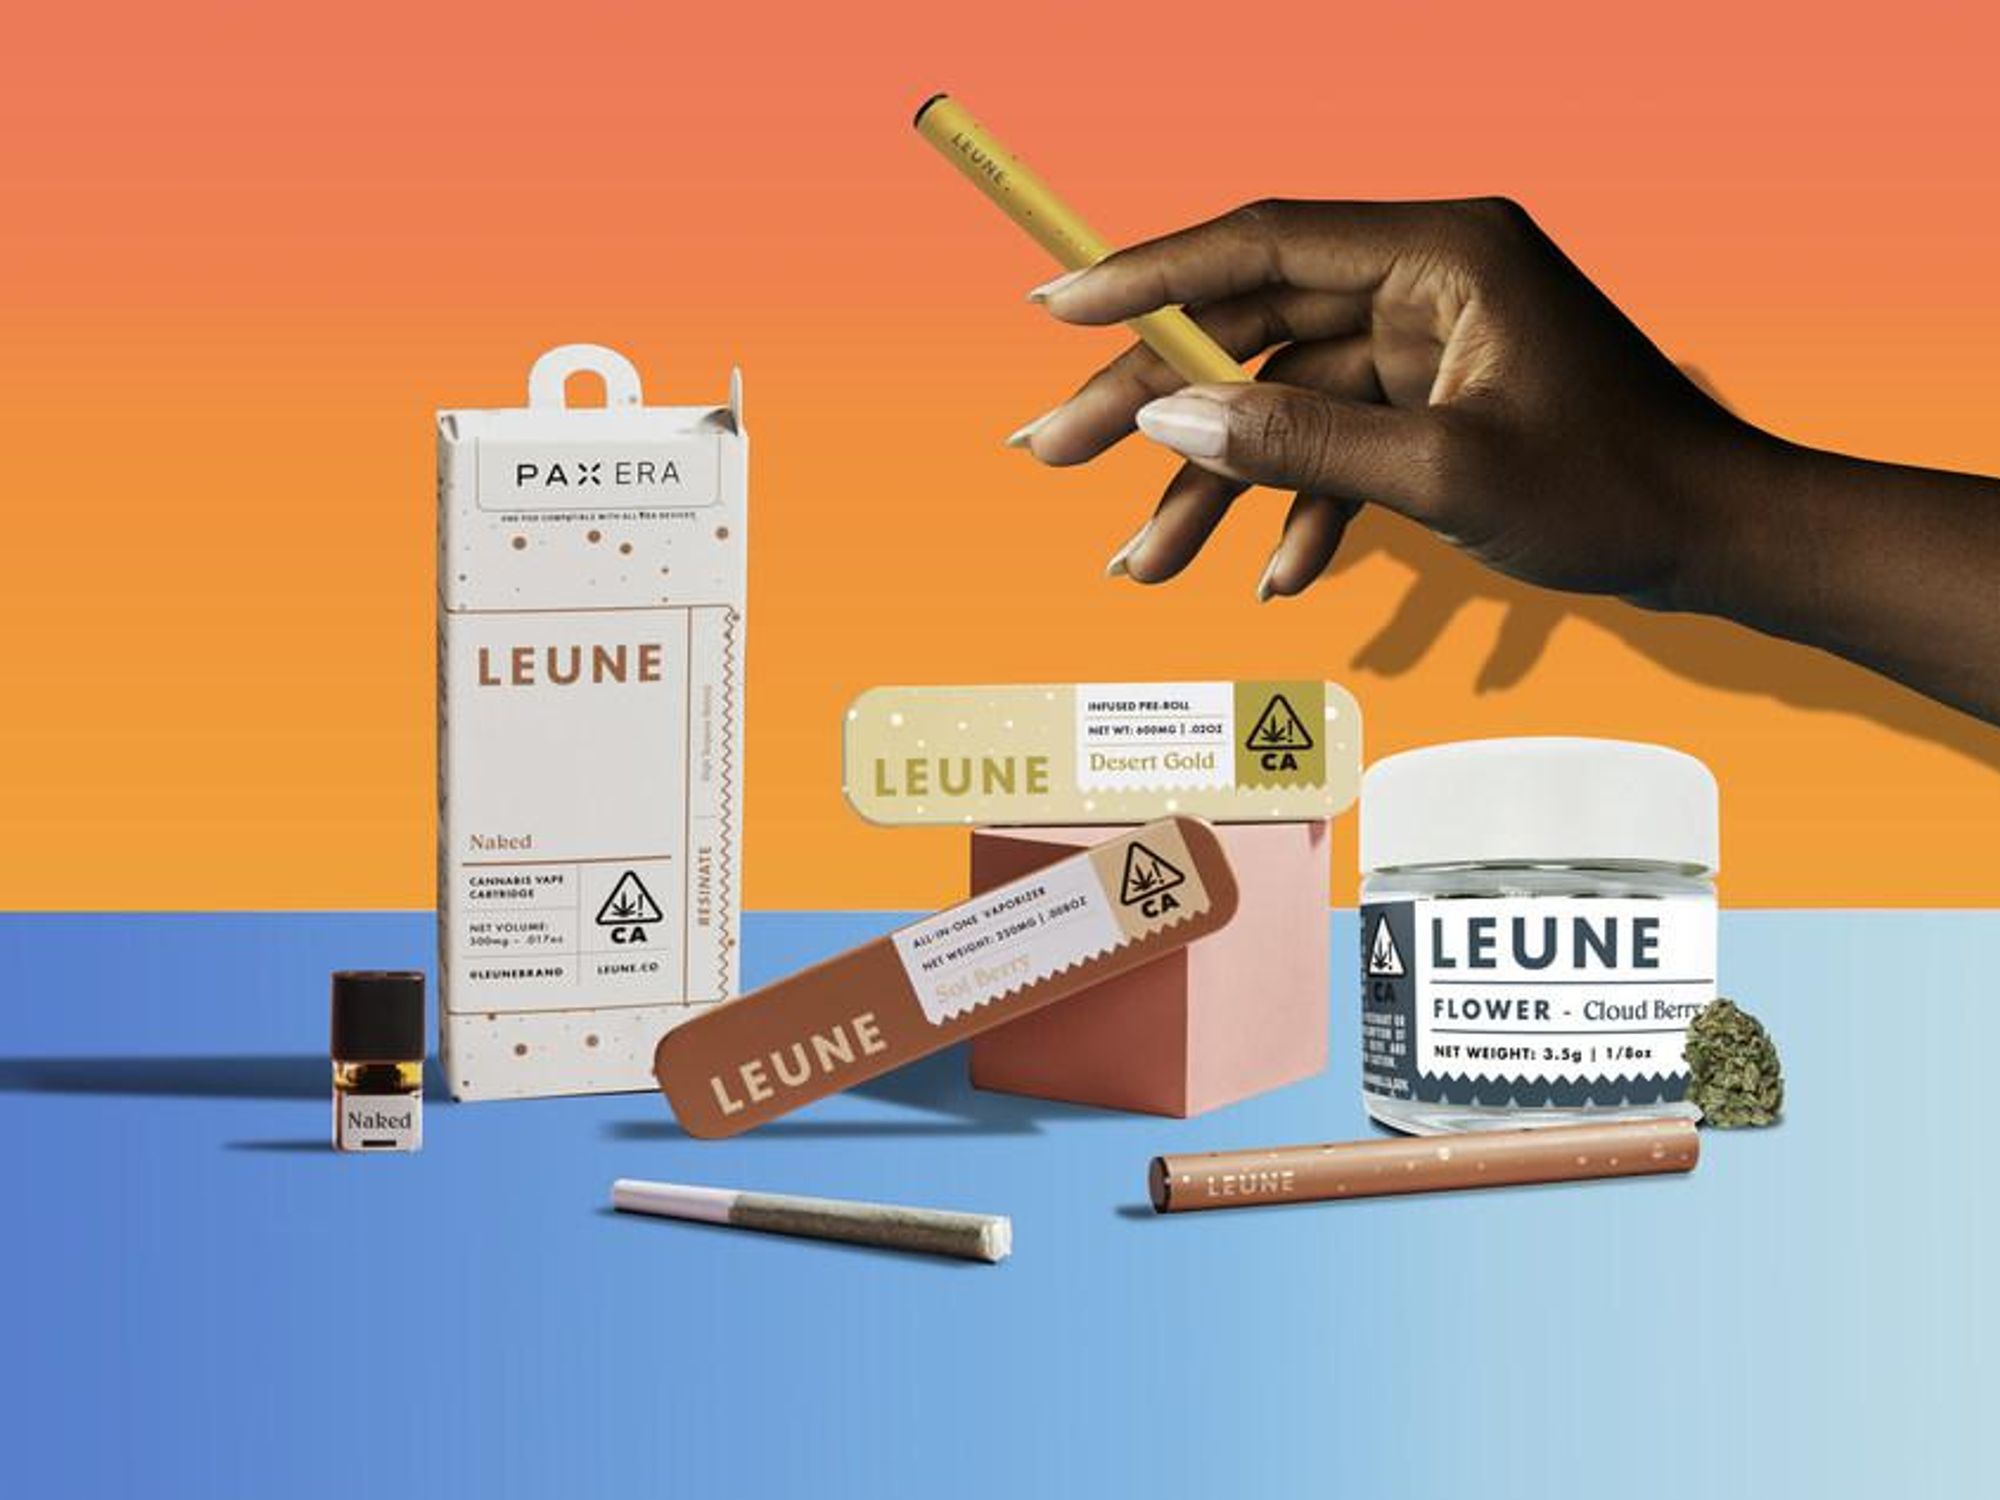 Assorted LEUNE cannabis products including joints, flower, PAX pods, and oils.